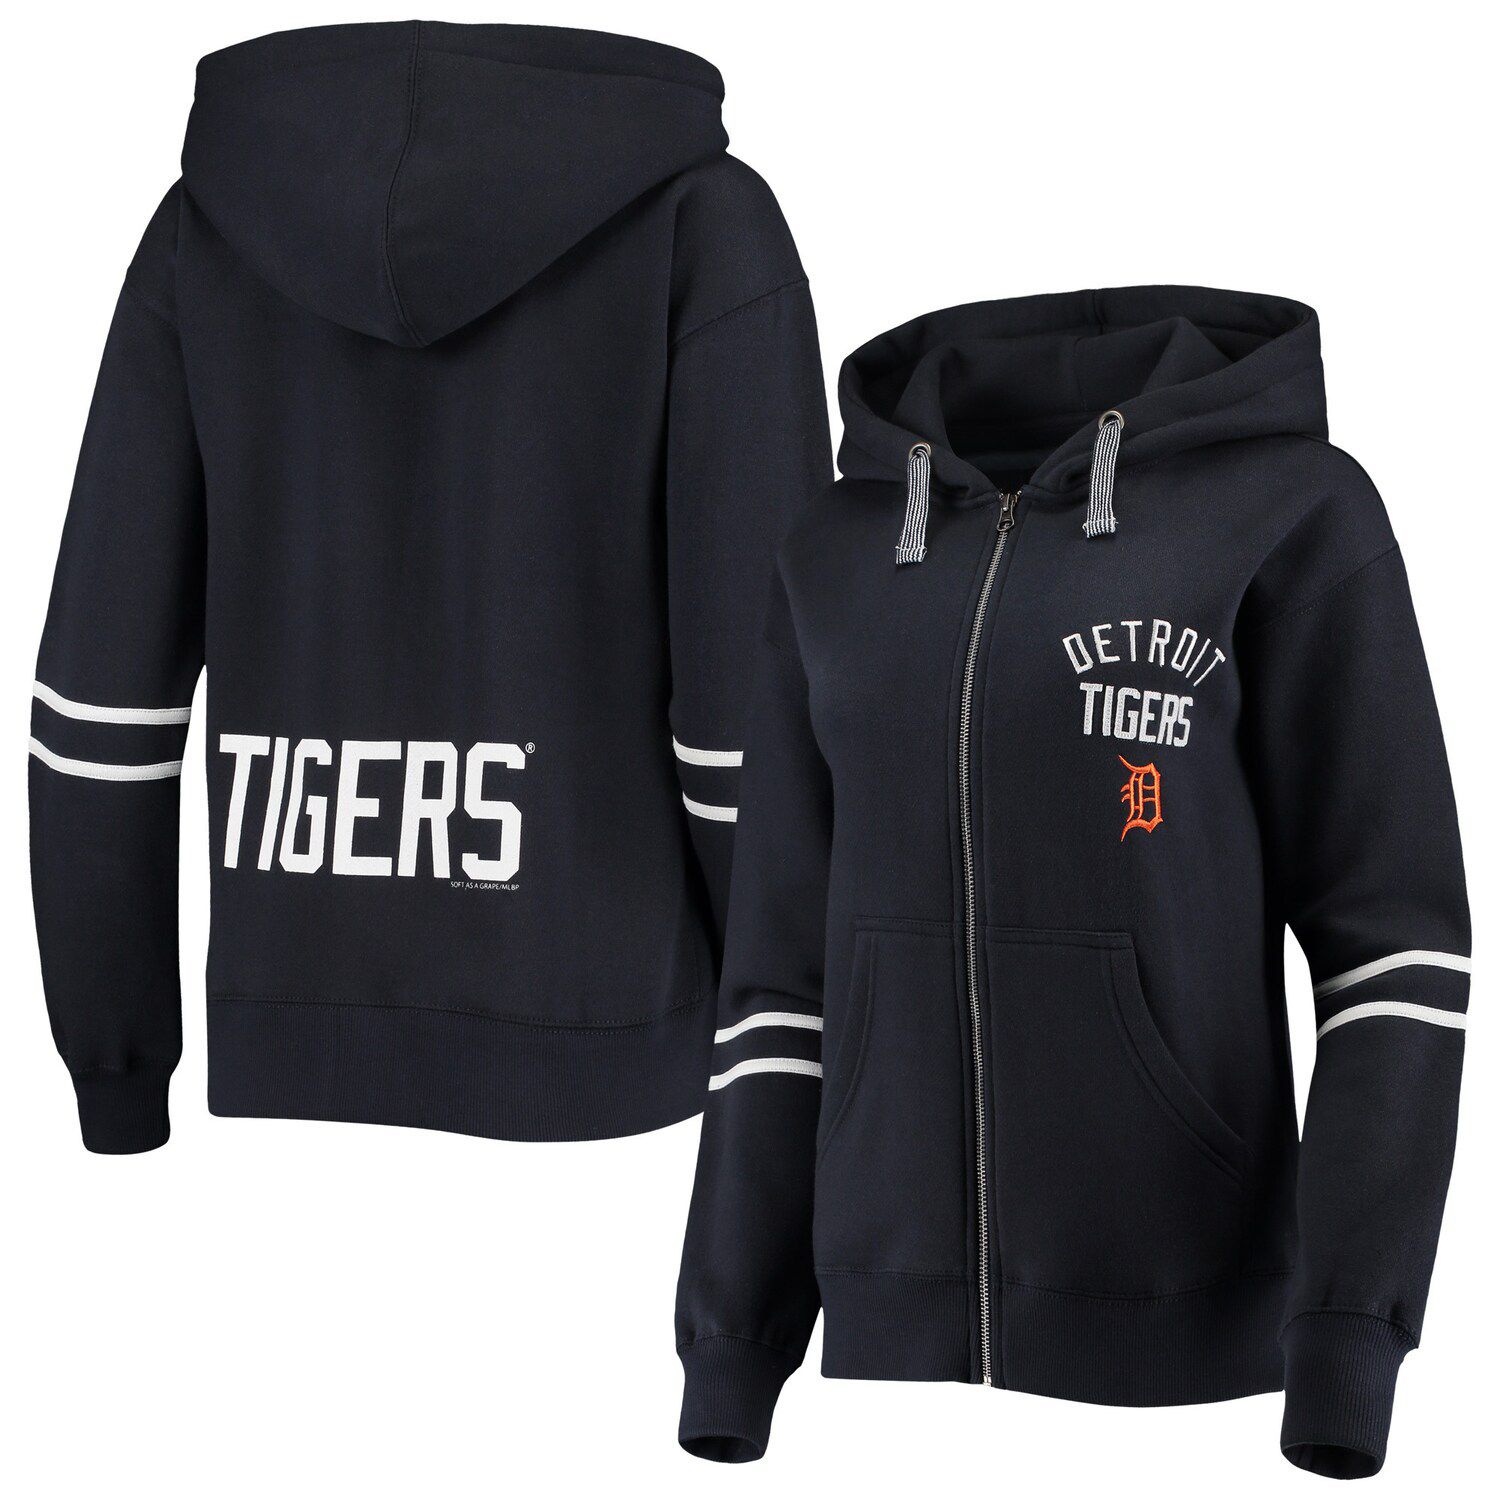 Image for Unbranded Women's Soft as a Grape Navy Detroit Tigers Full-Zip Hoodie Jacket at Kohl's.